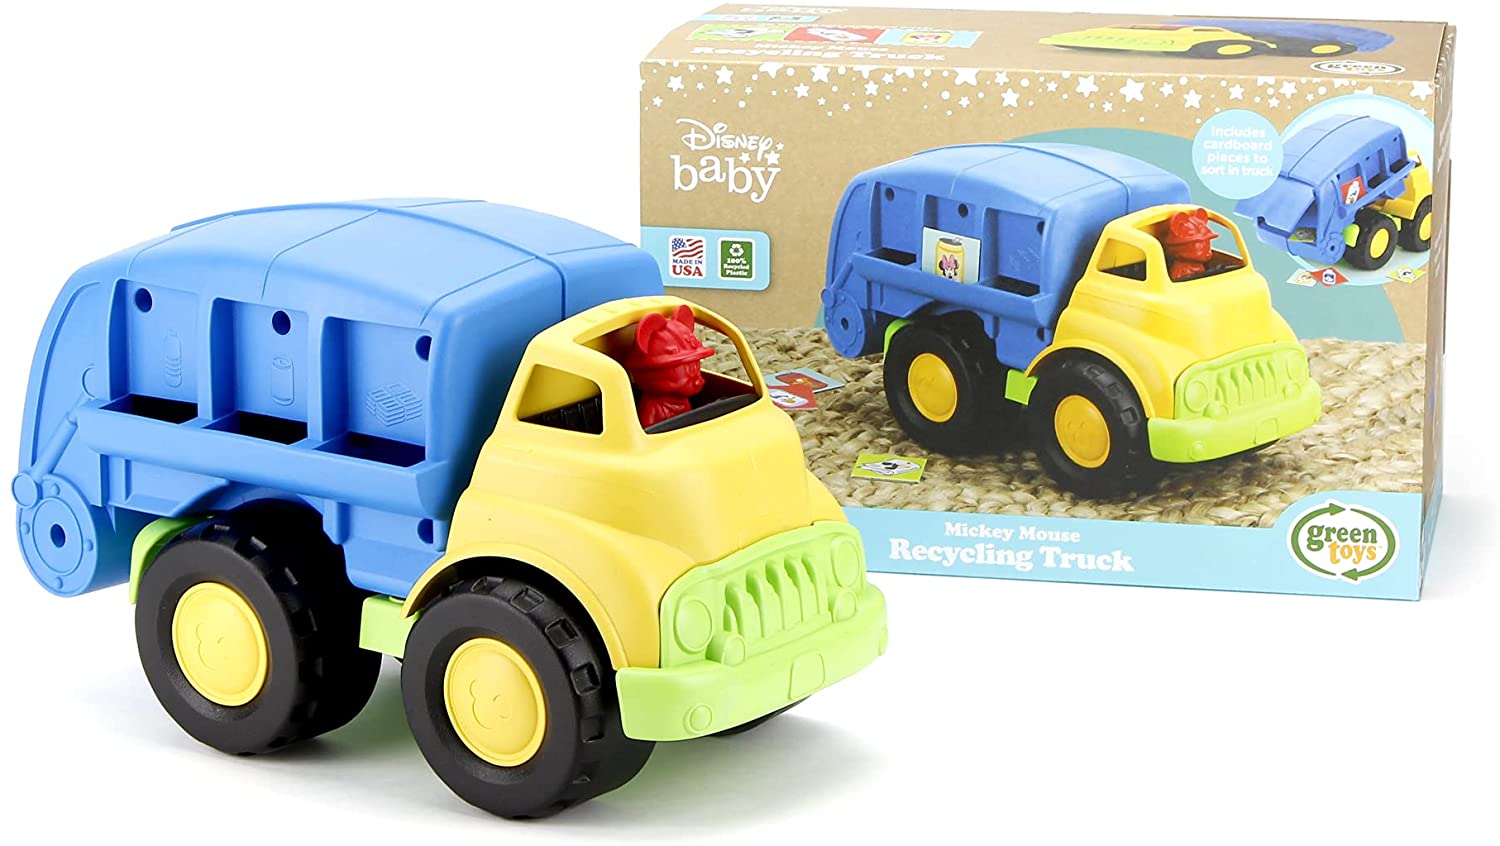 Green Toys Disney Baby Exclusive Mickey Mouse Recycling Truck (Blue) $8.70 + Free Ship w/Prime